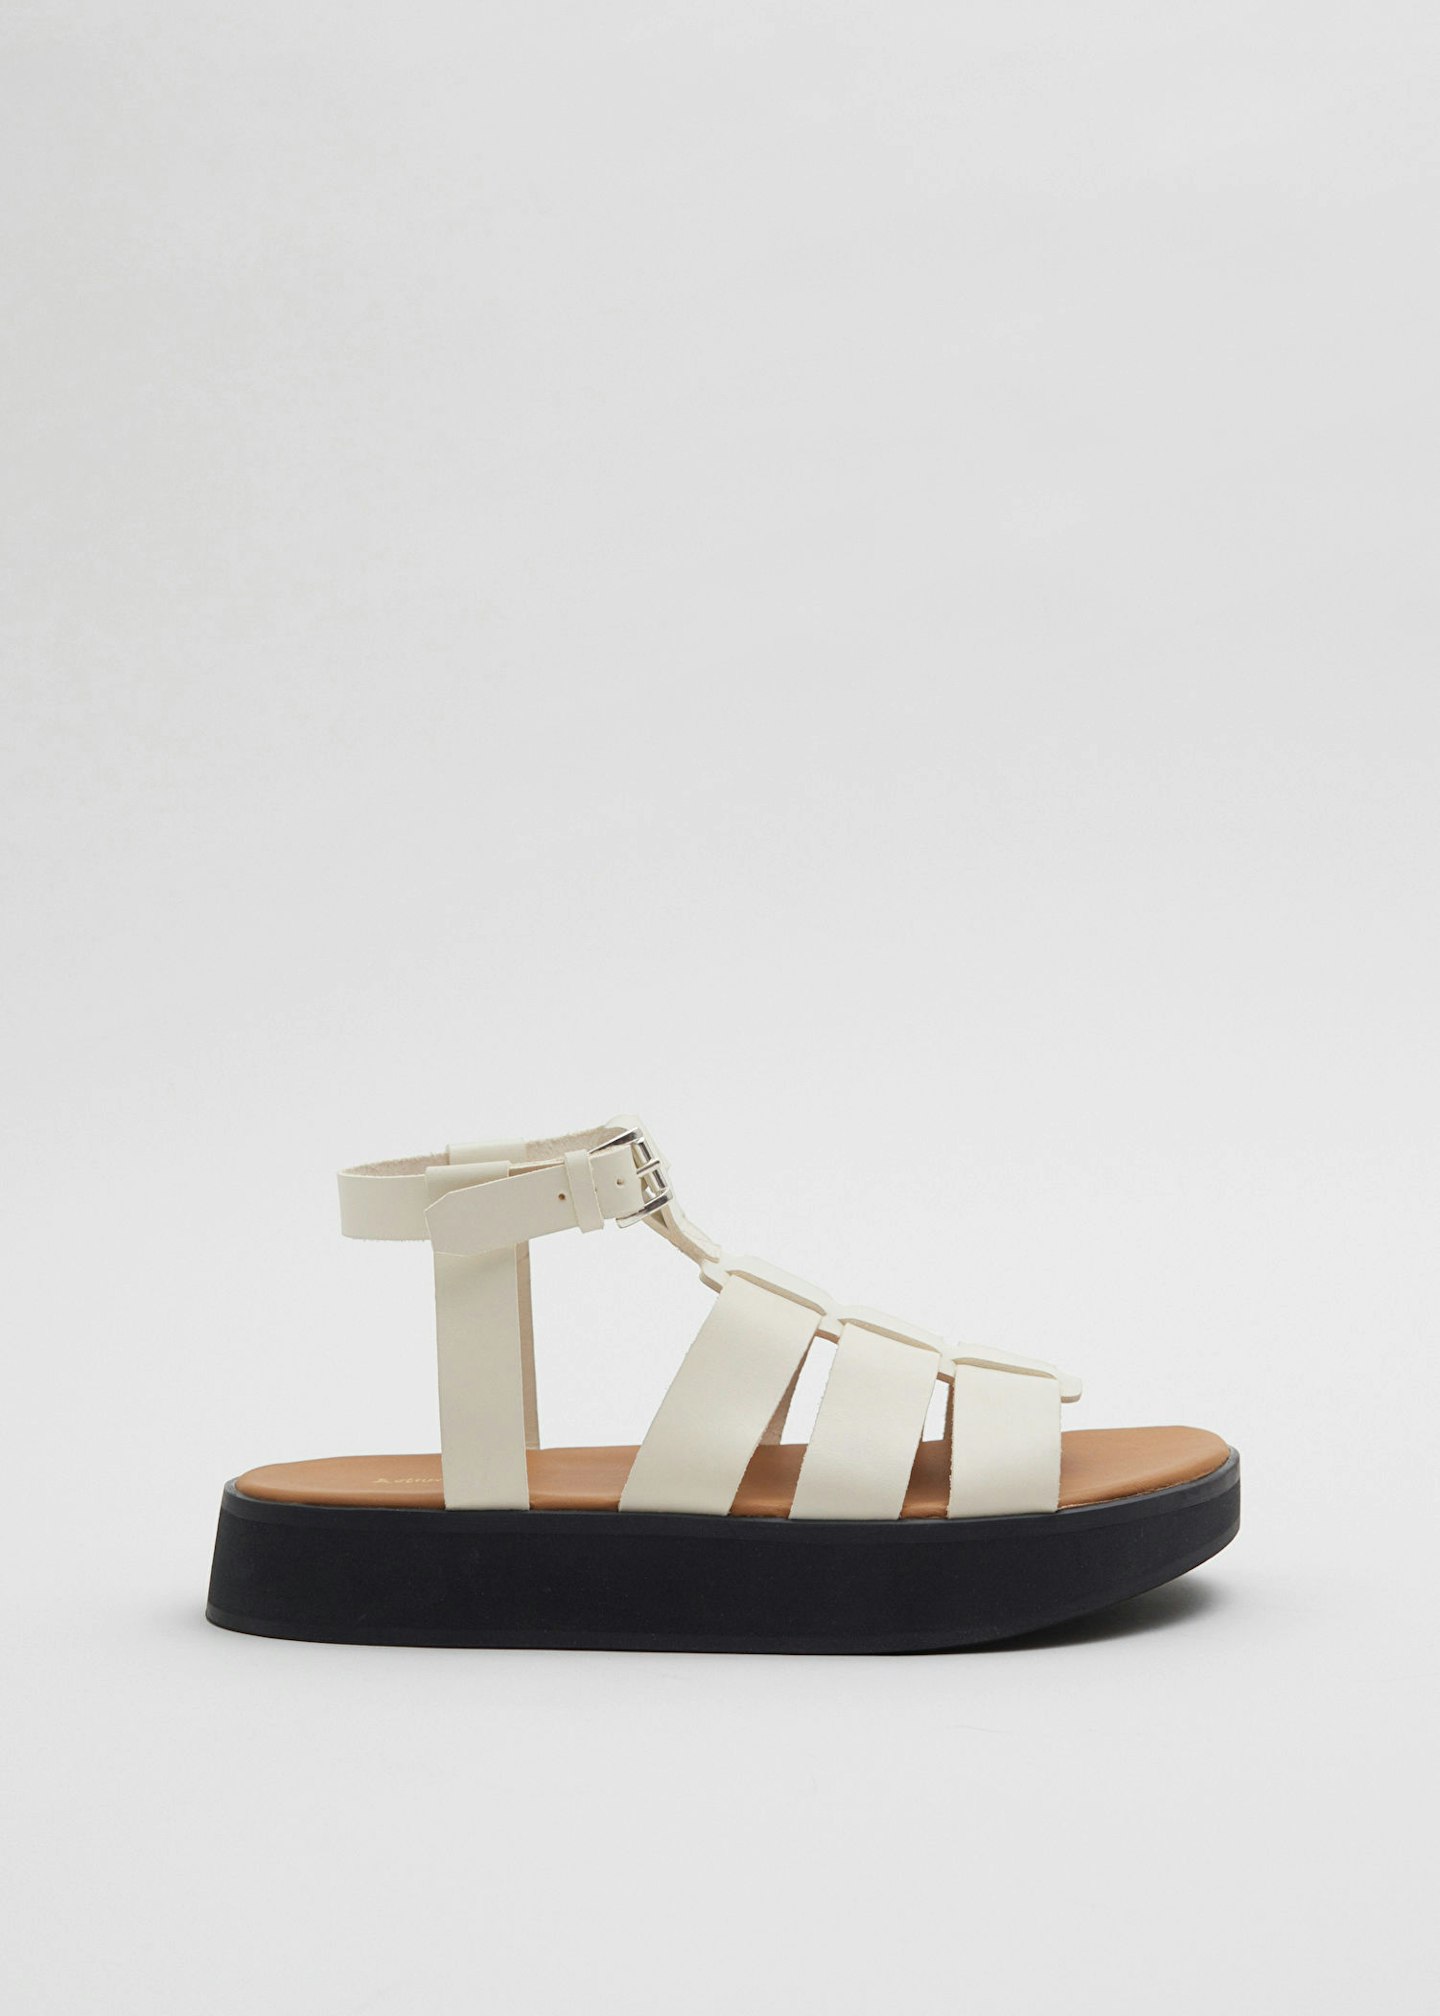 & Other Stories, Fisherman Leather Sandals